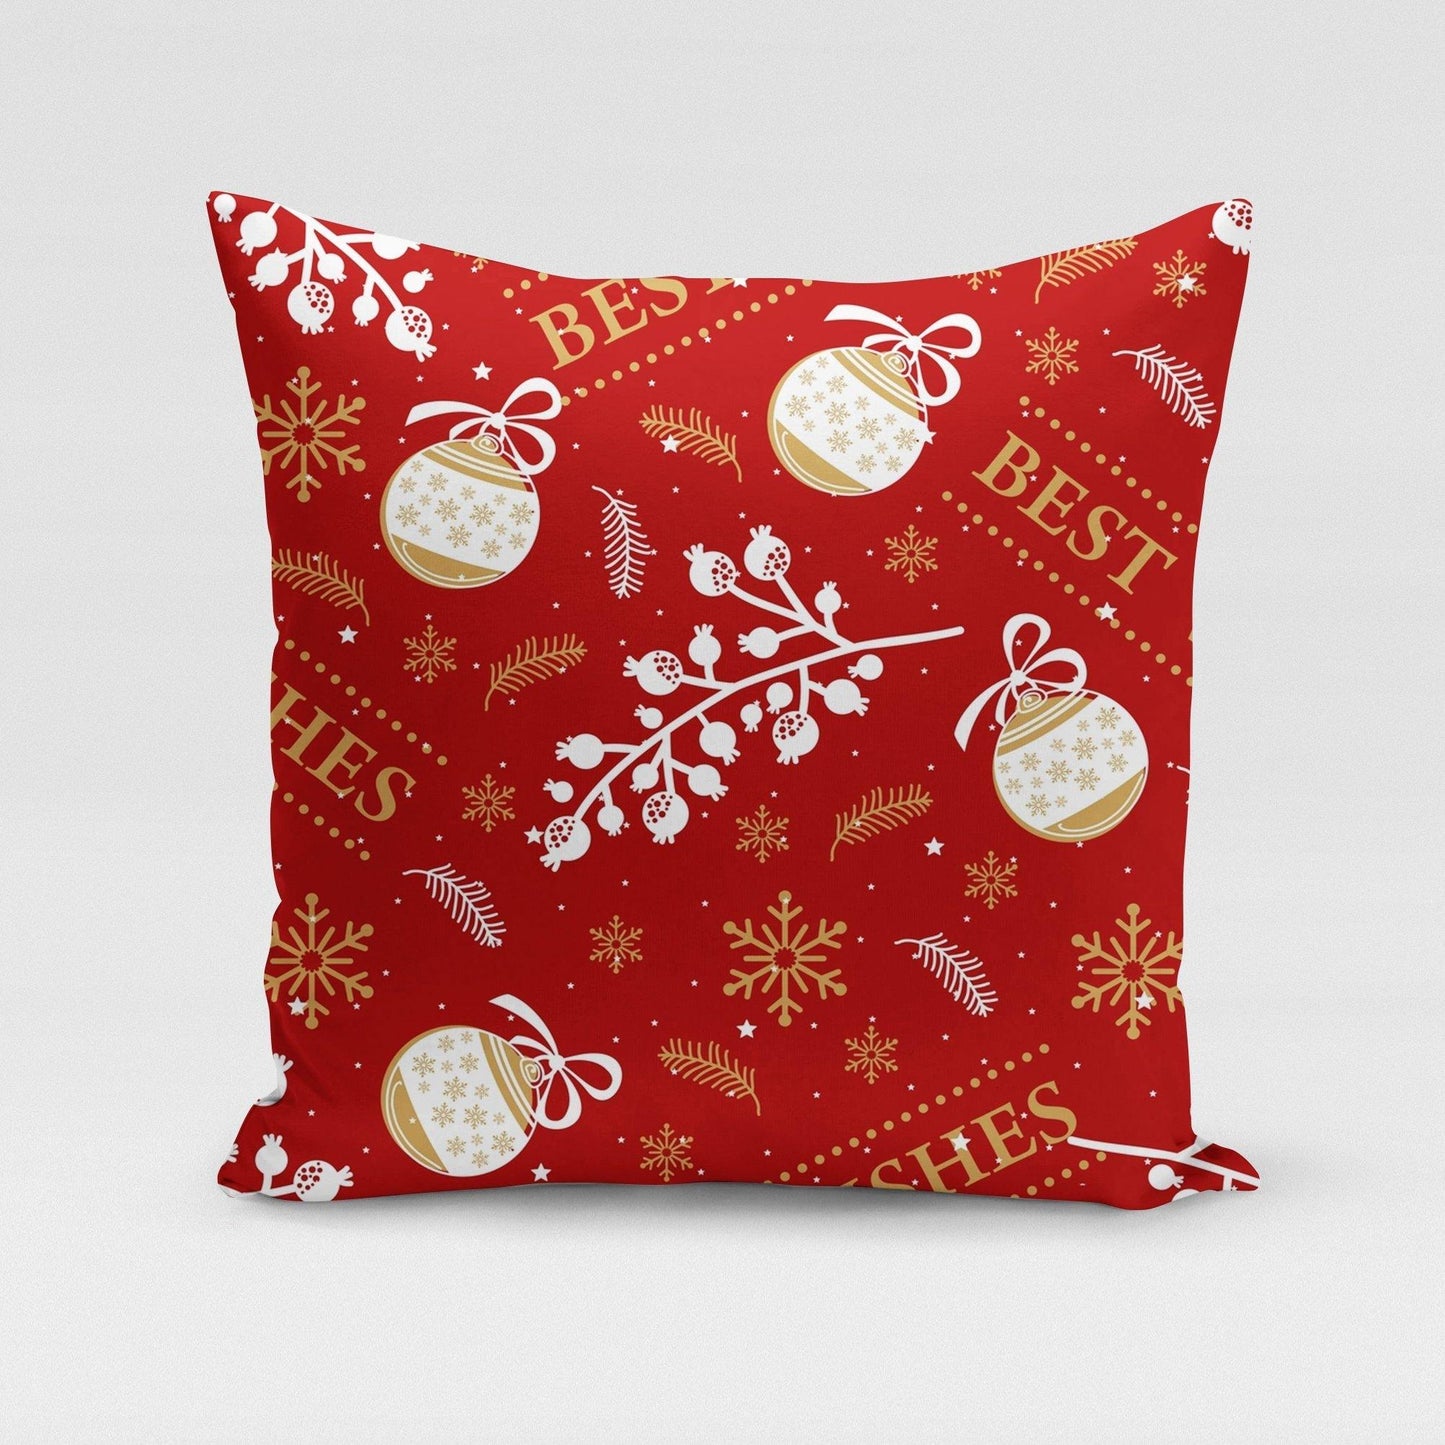 Best Wishes Pillow Cover